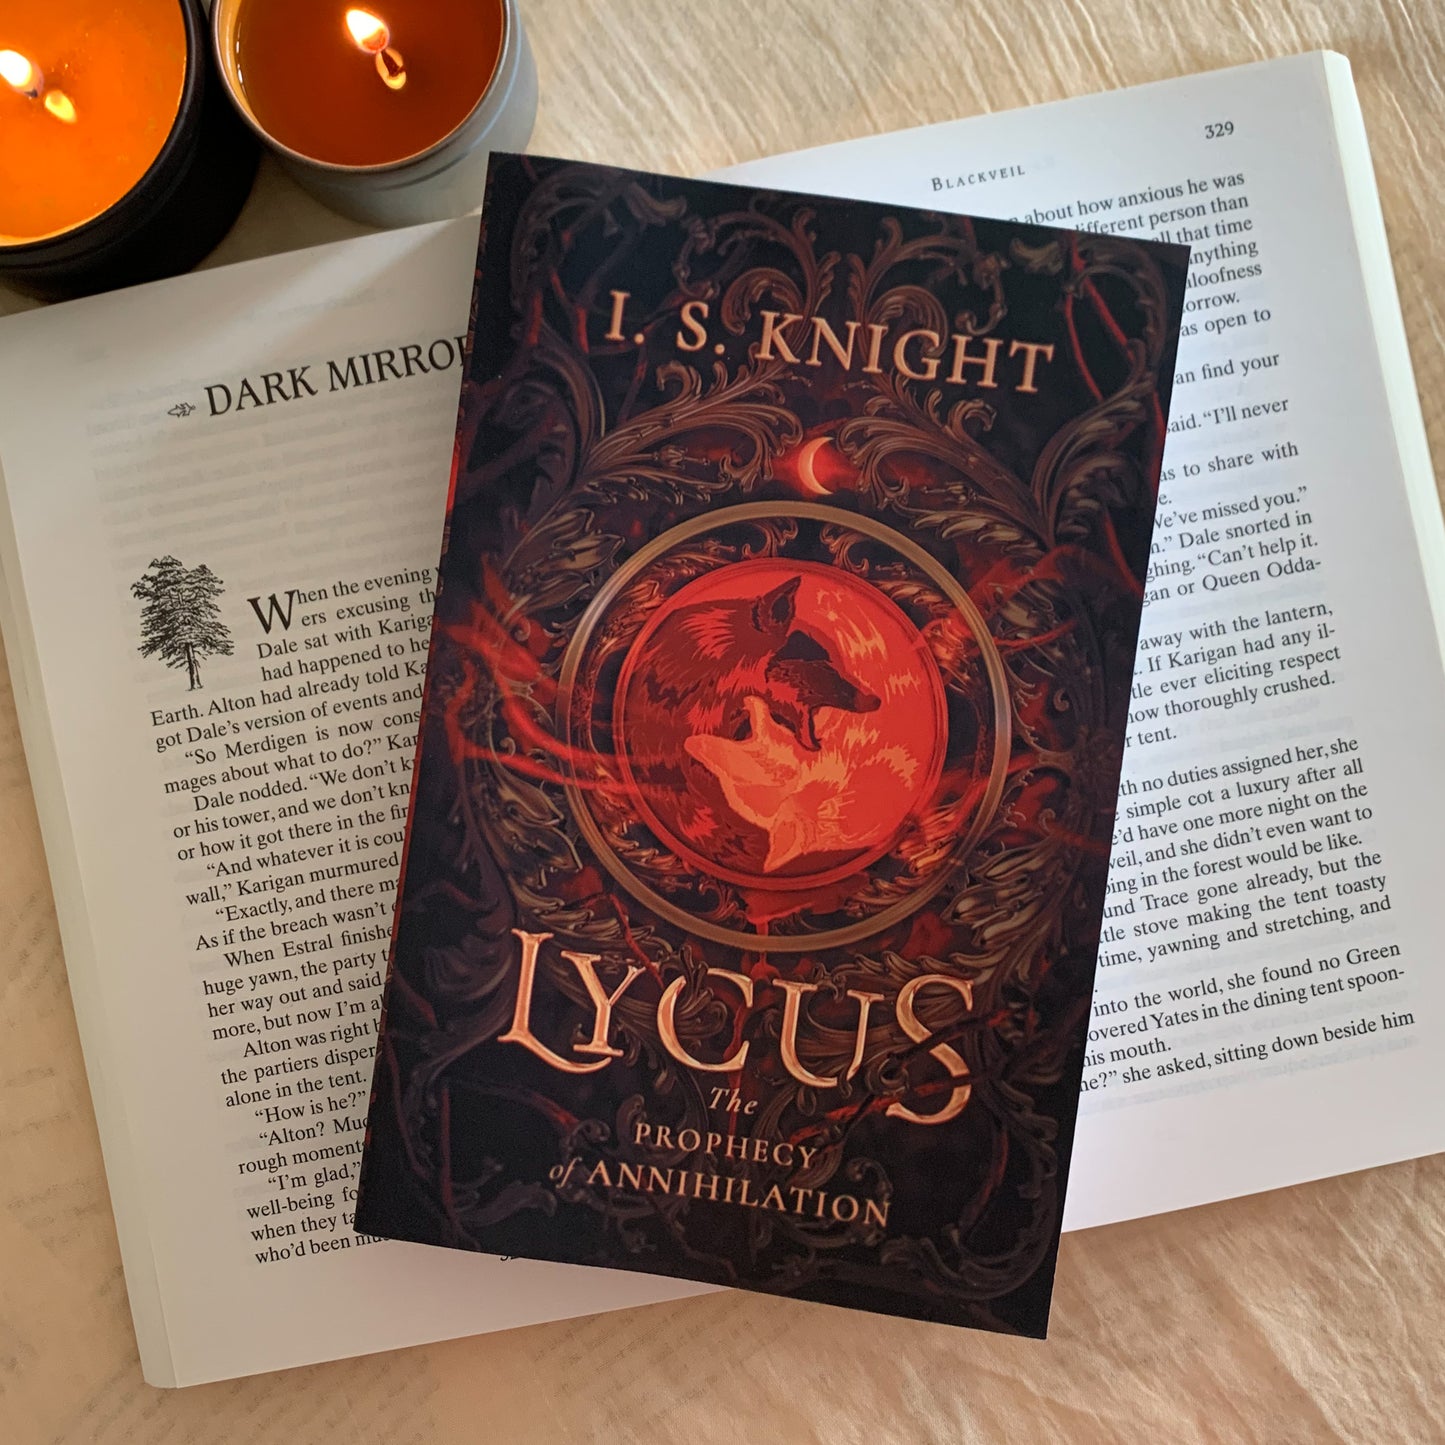 Lycus: The Prophecy of Annihilation by I. S. Knight